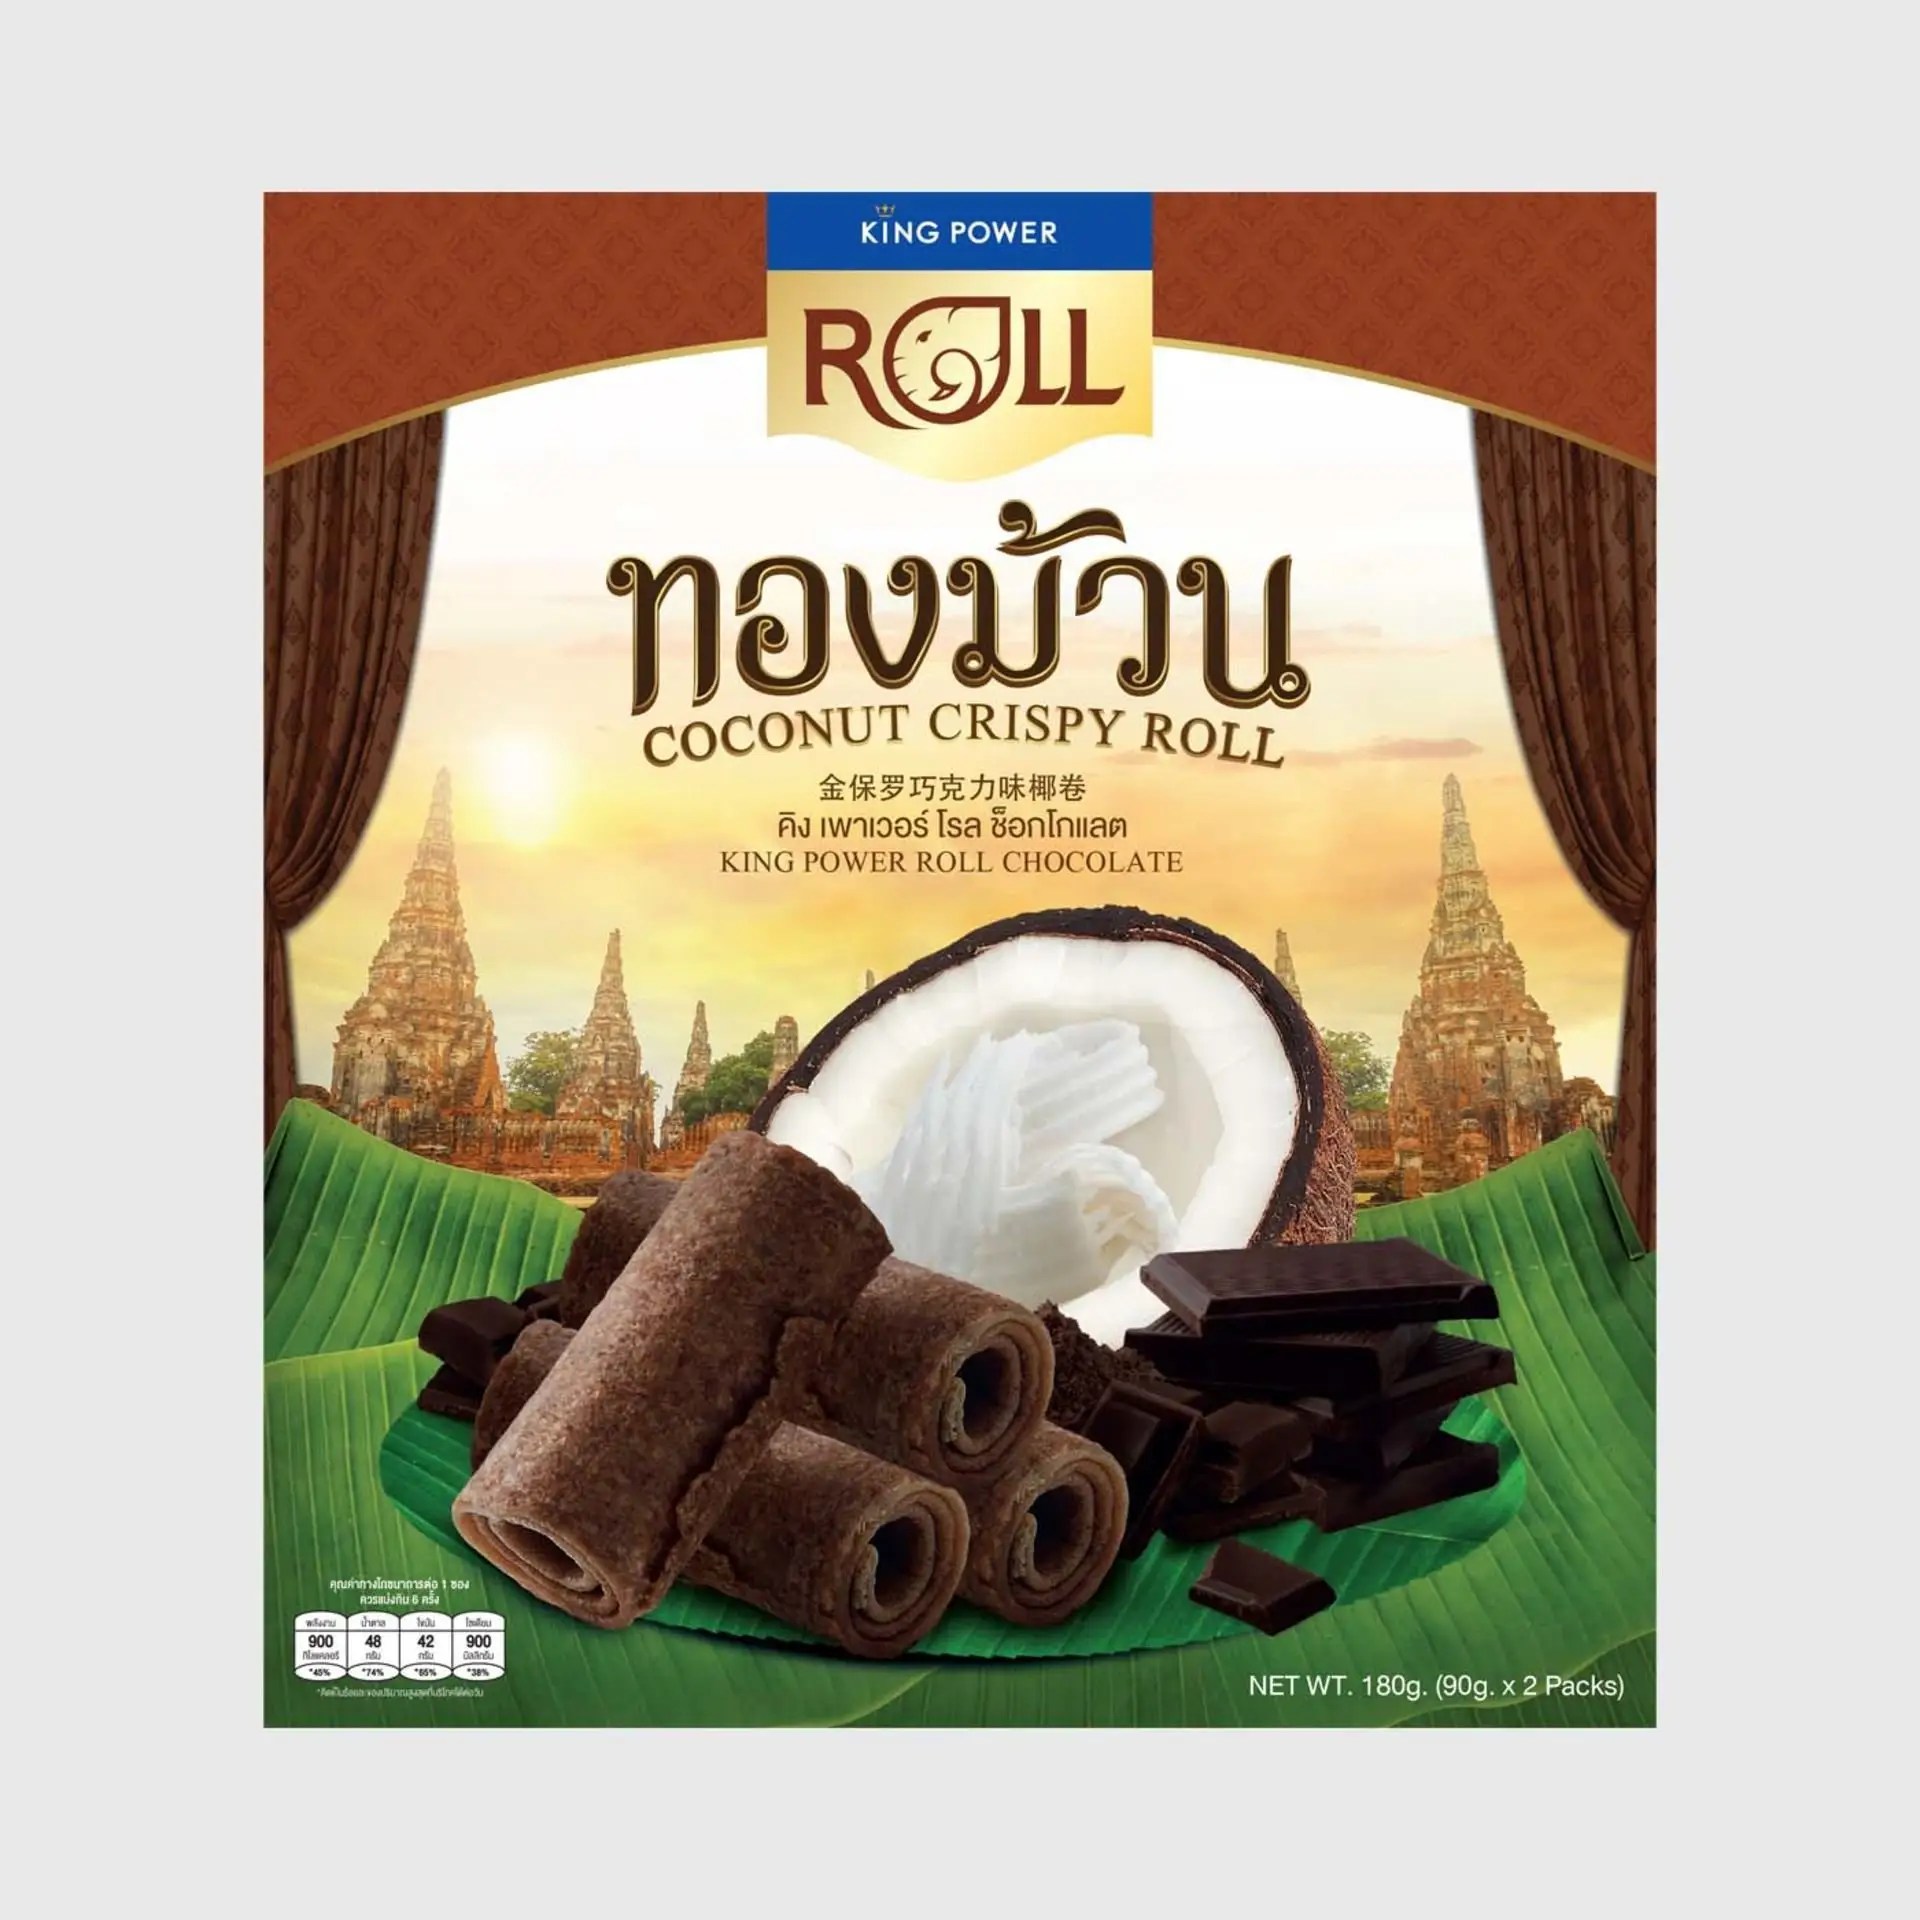 KING POWER ROLL Chocolate - Sweet Coconut Crispy Rolls THAI SNACK FOR EVERYONE TO ENJOY WITH DELICIOUS TASTE